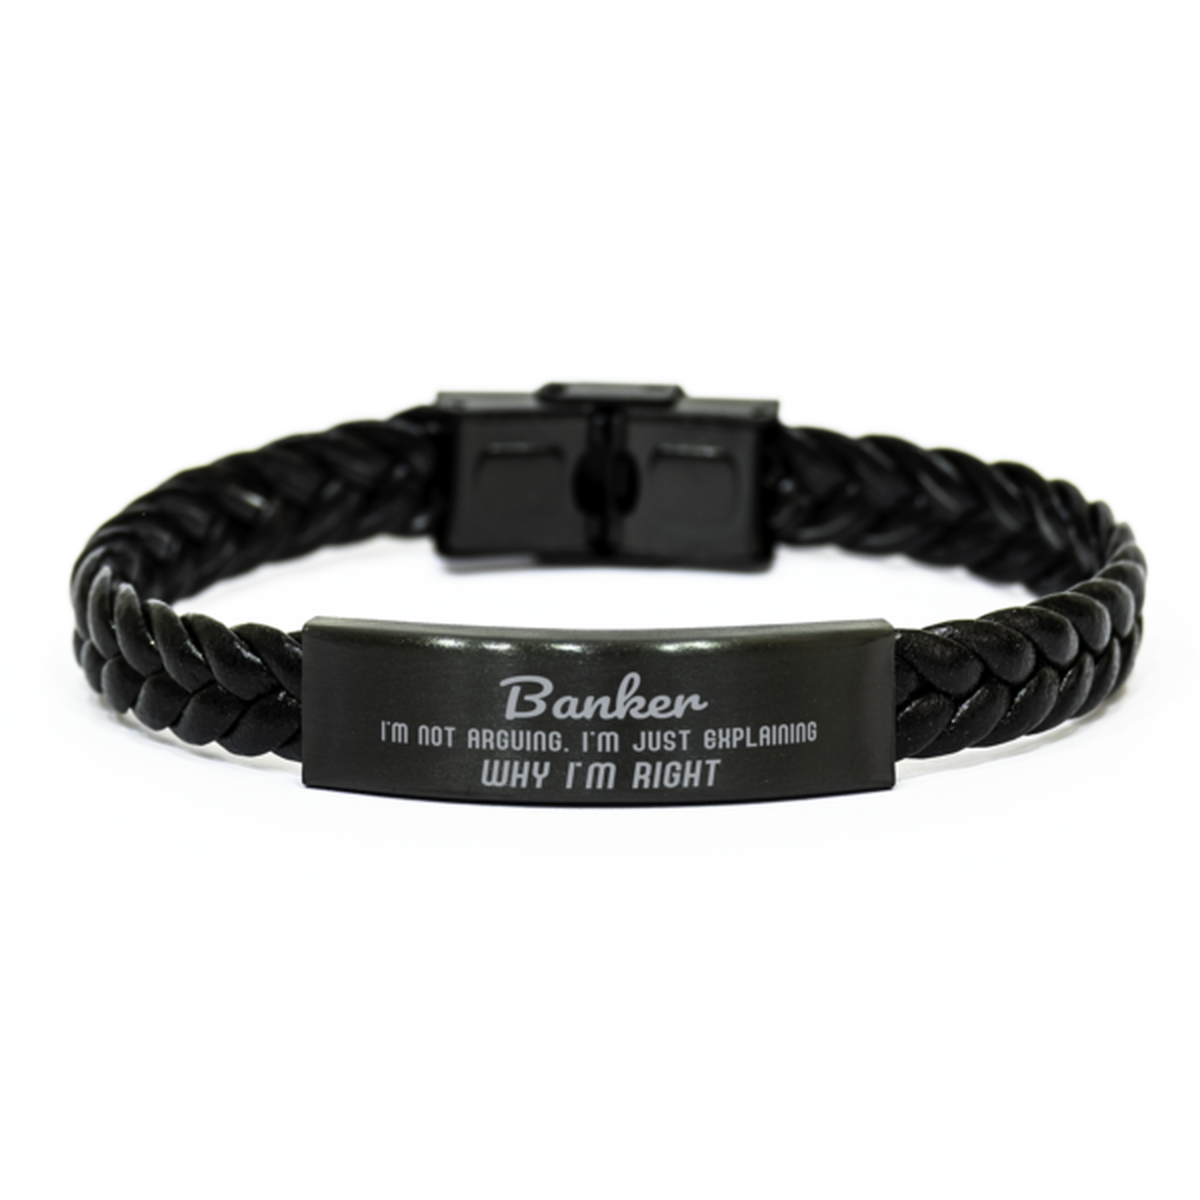 Banker I'm not Arguing. I'm Just Explaining Why I'm RIGHT Braided Leather Bracelet, Graduation Birthday Christmas Banker Gifts For Banker Funny Saying Quote Present for Men Women Coworker